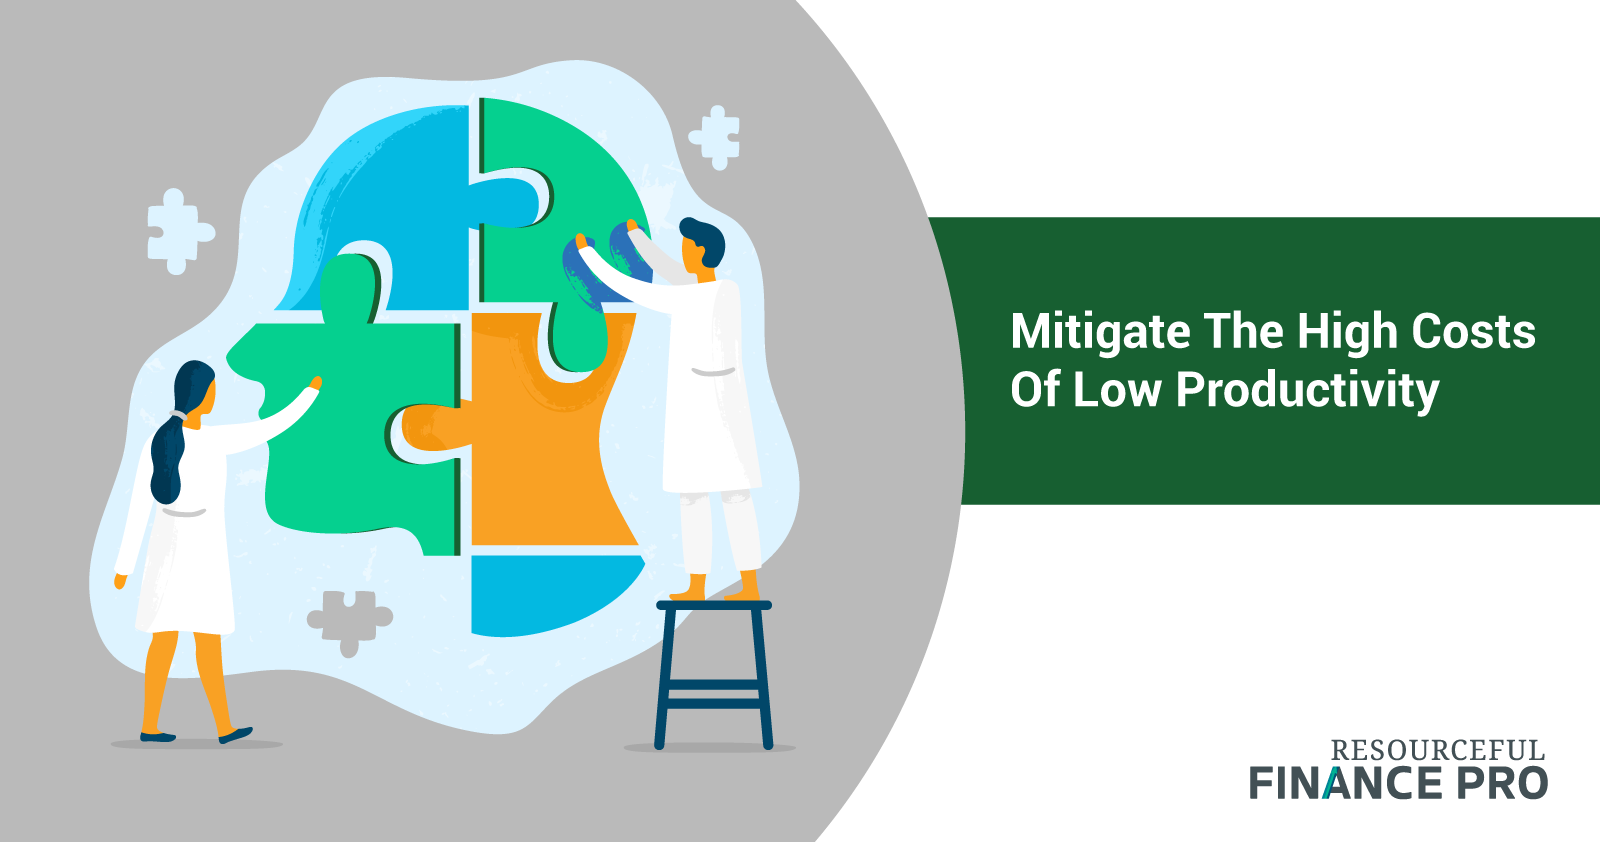 Mitigate the high costs of low productivity